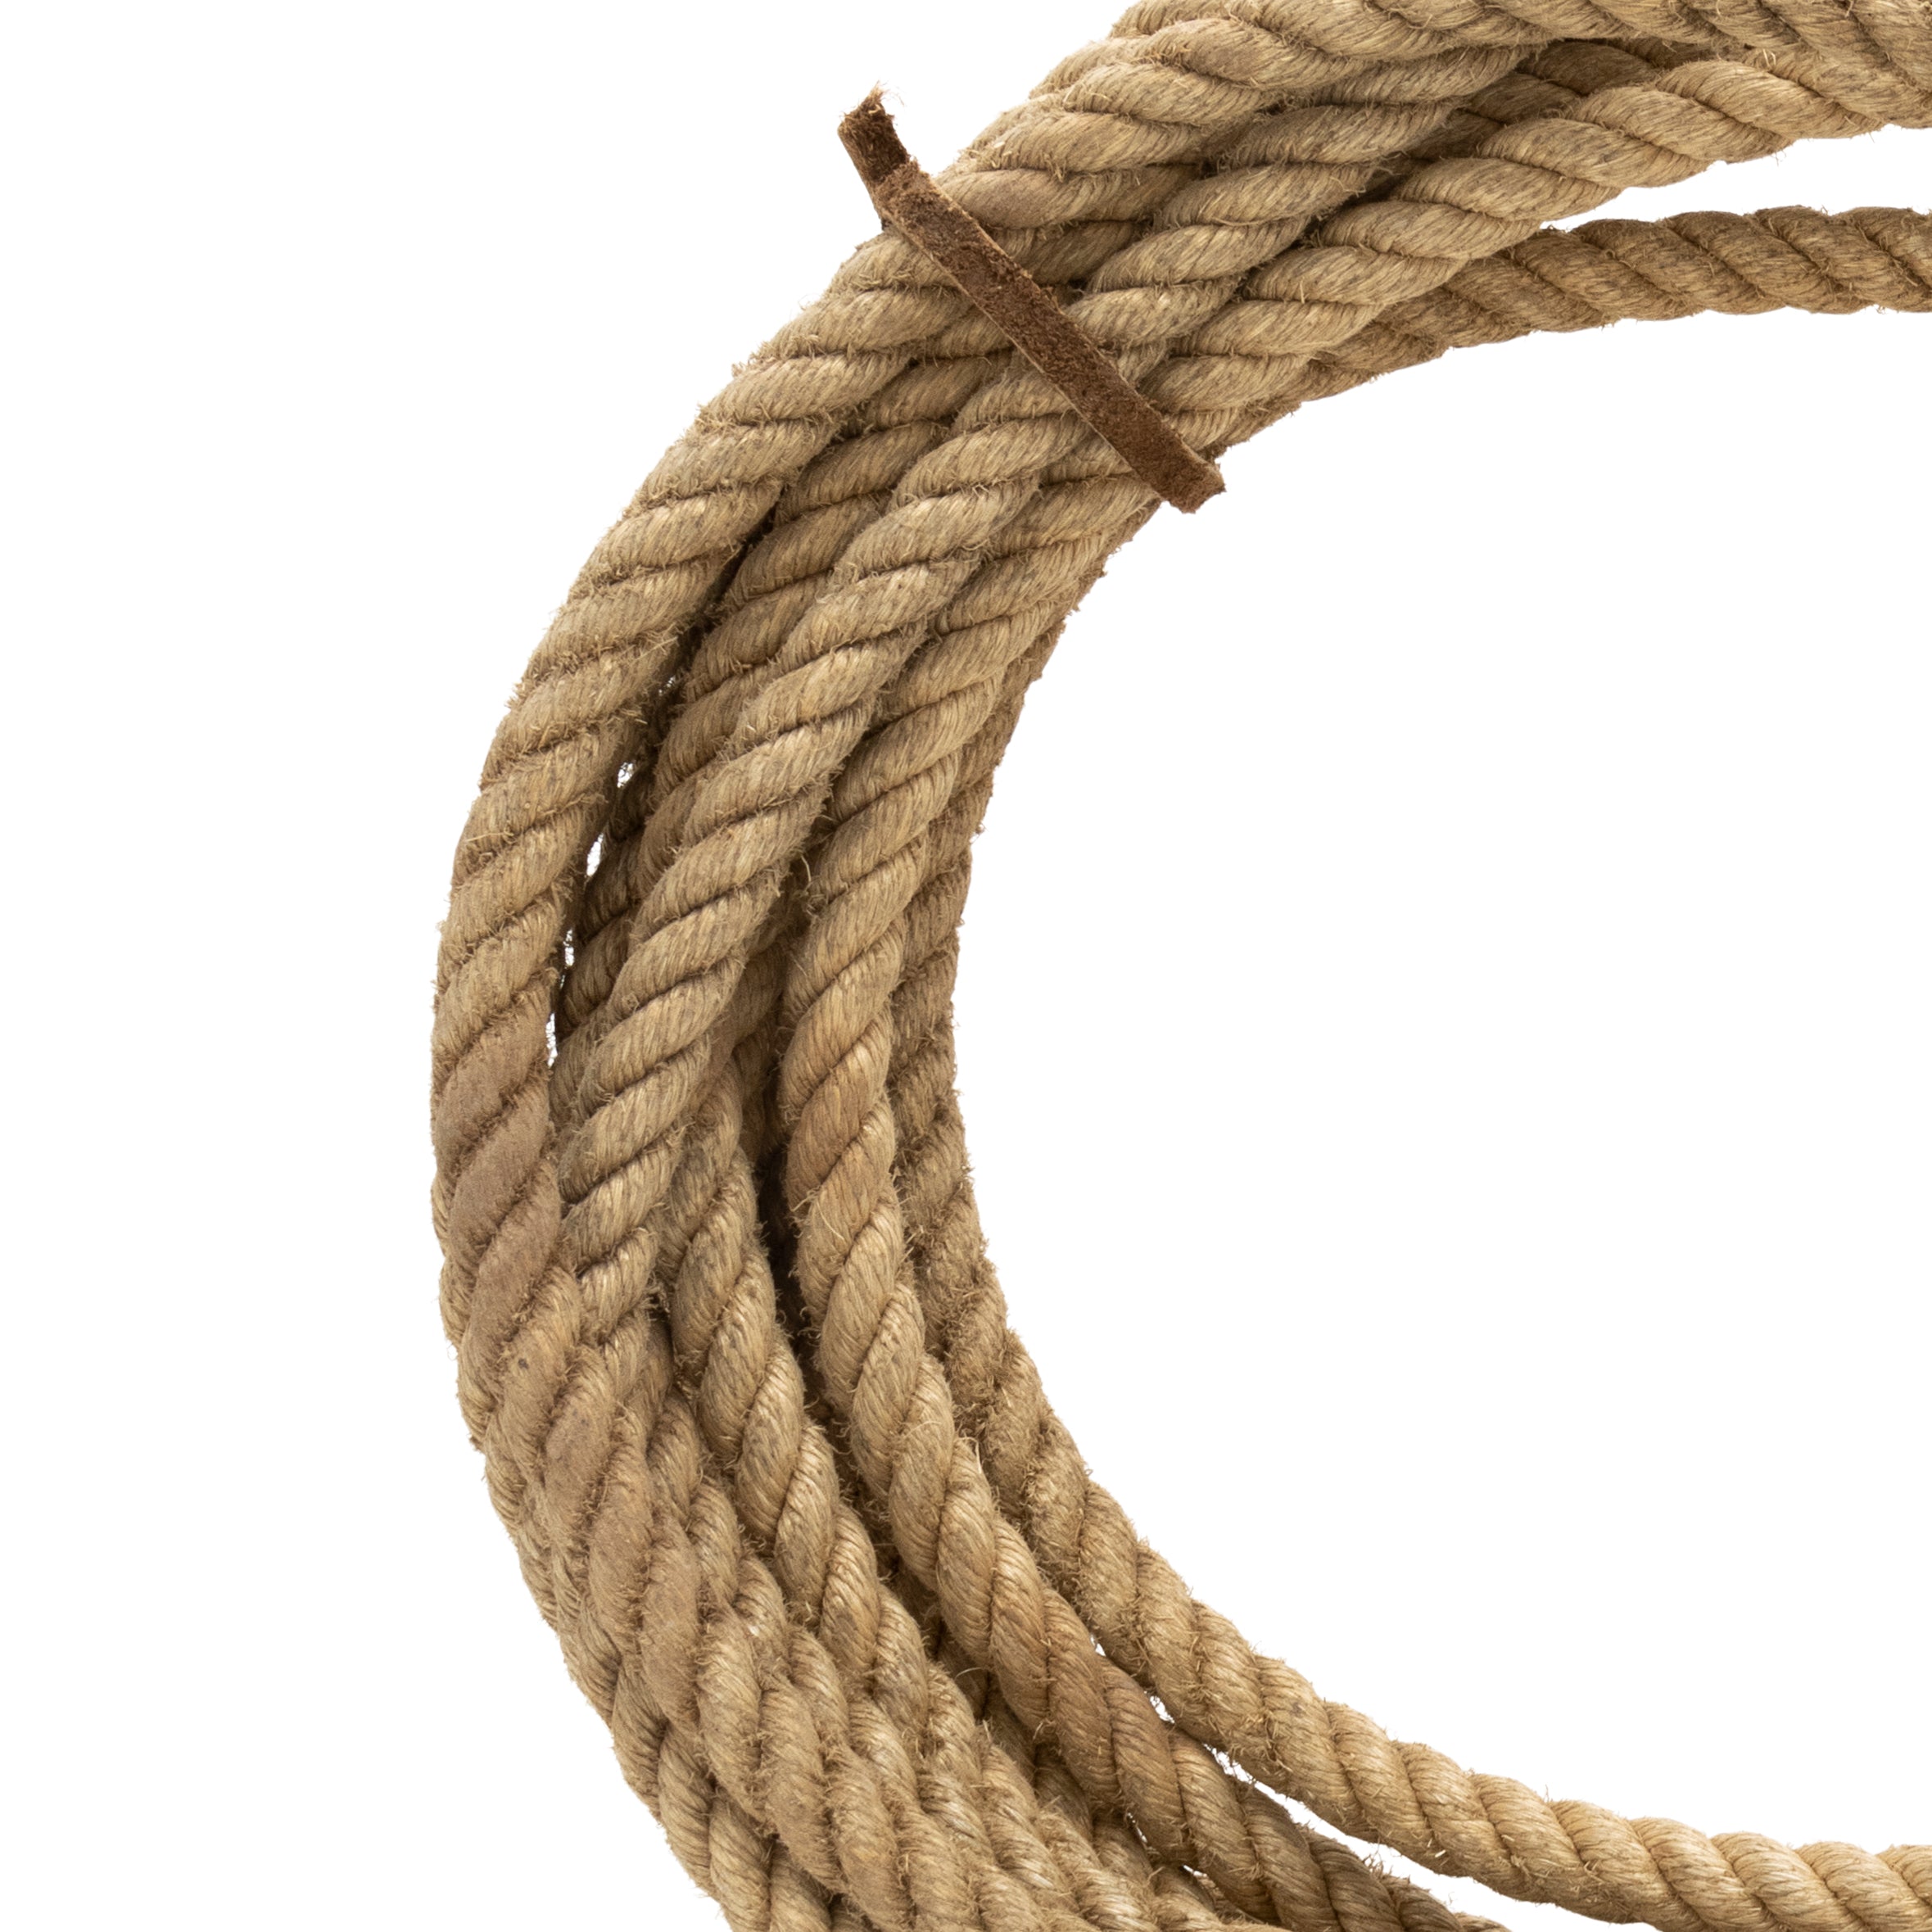 Rancher's Rope